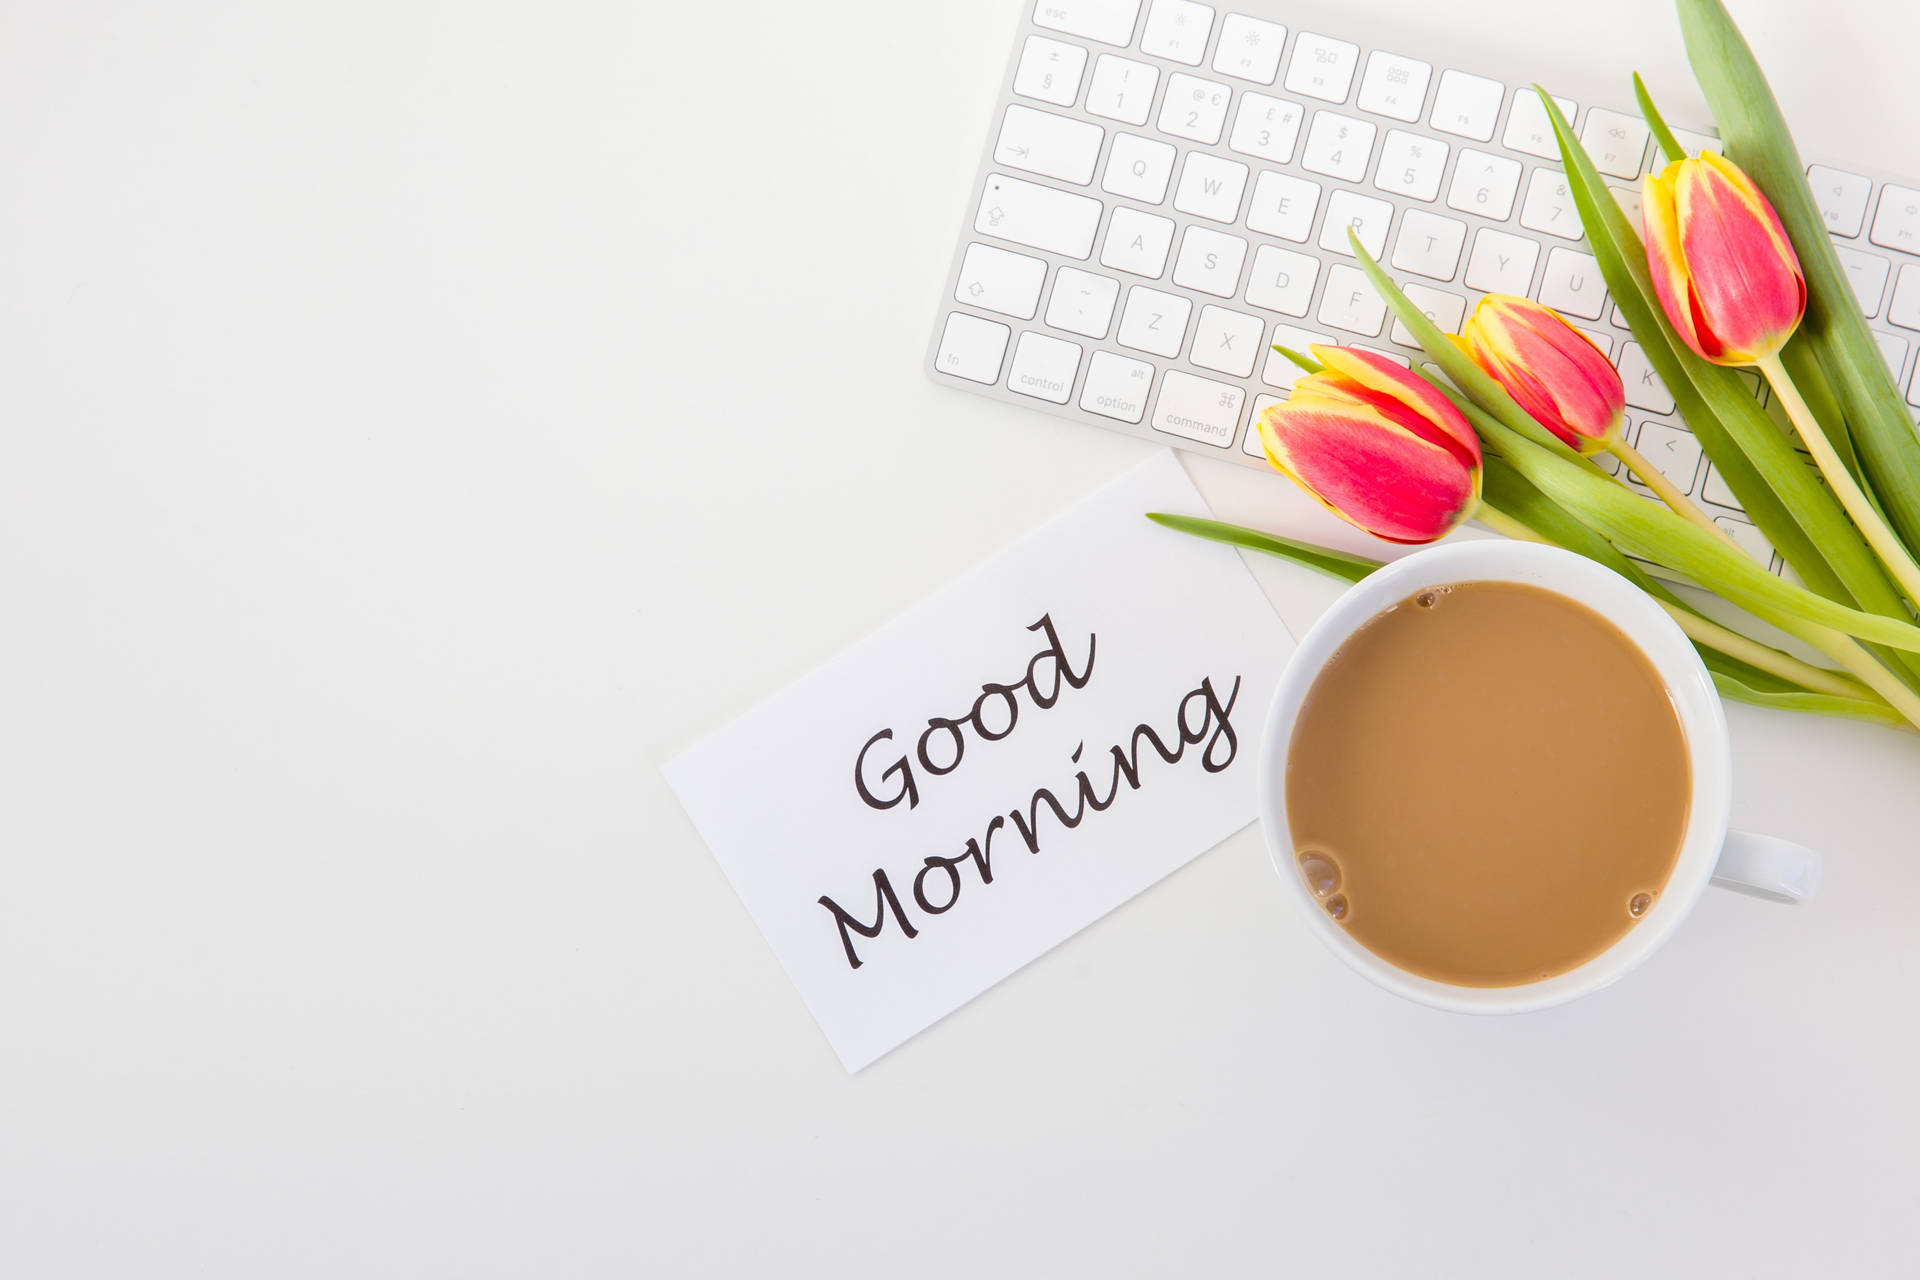 Wallpaper Good, Morning, Inscription, Phrase, Coffee, Tulips, Keyboard Picture